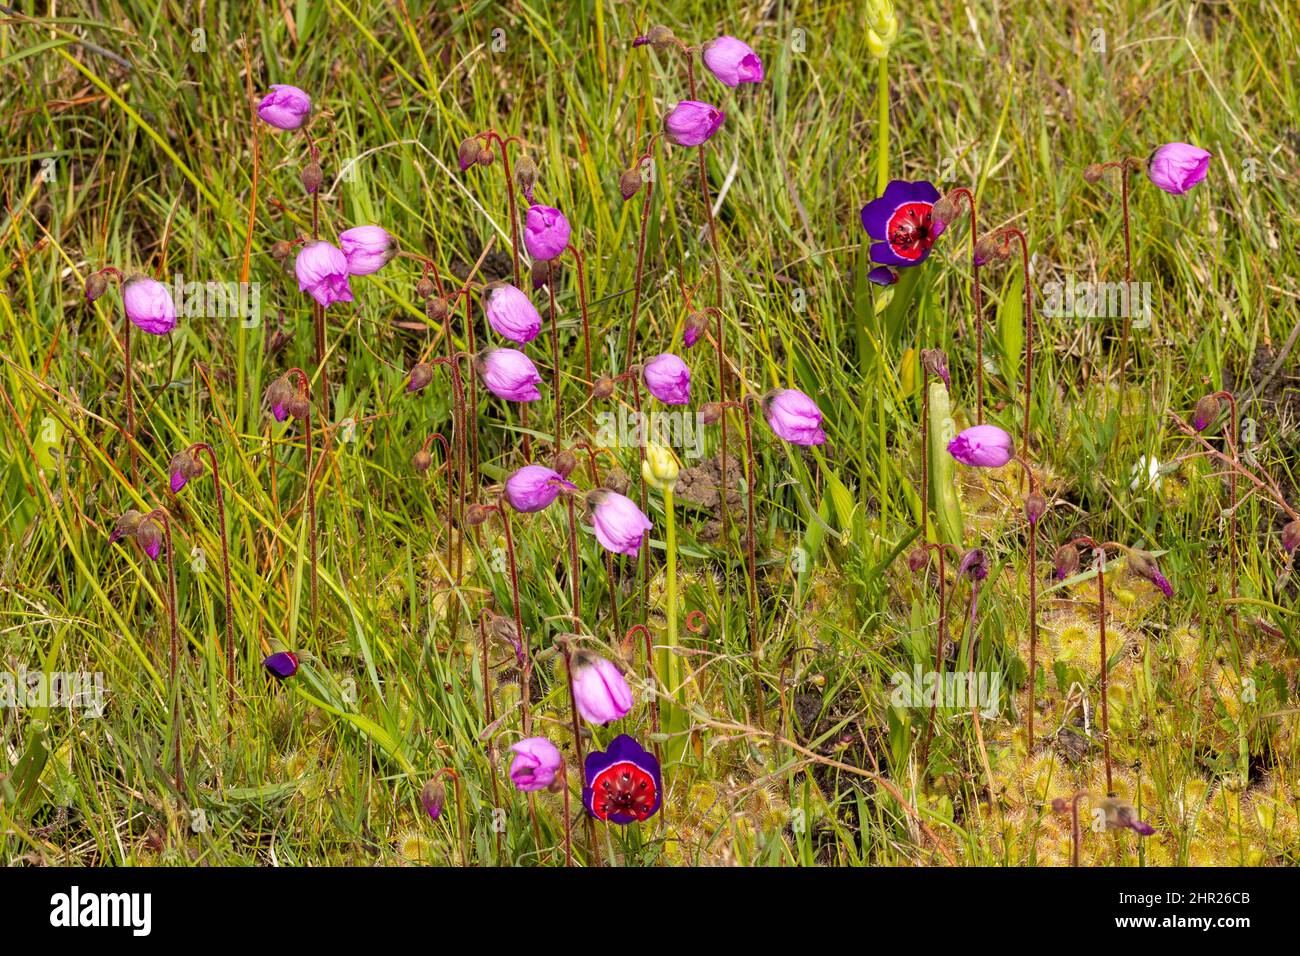 Flowers of the carnivorous plant Drosera pauciflora in natural habitat near Darling in the Western Cape of South Africa Stock Photo